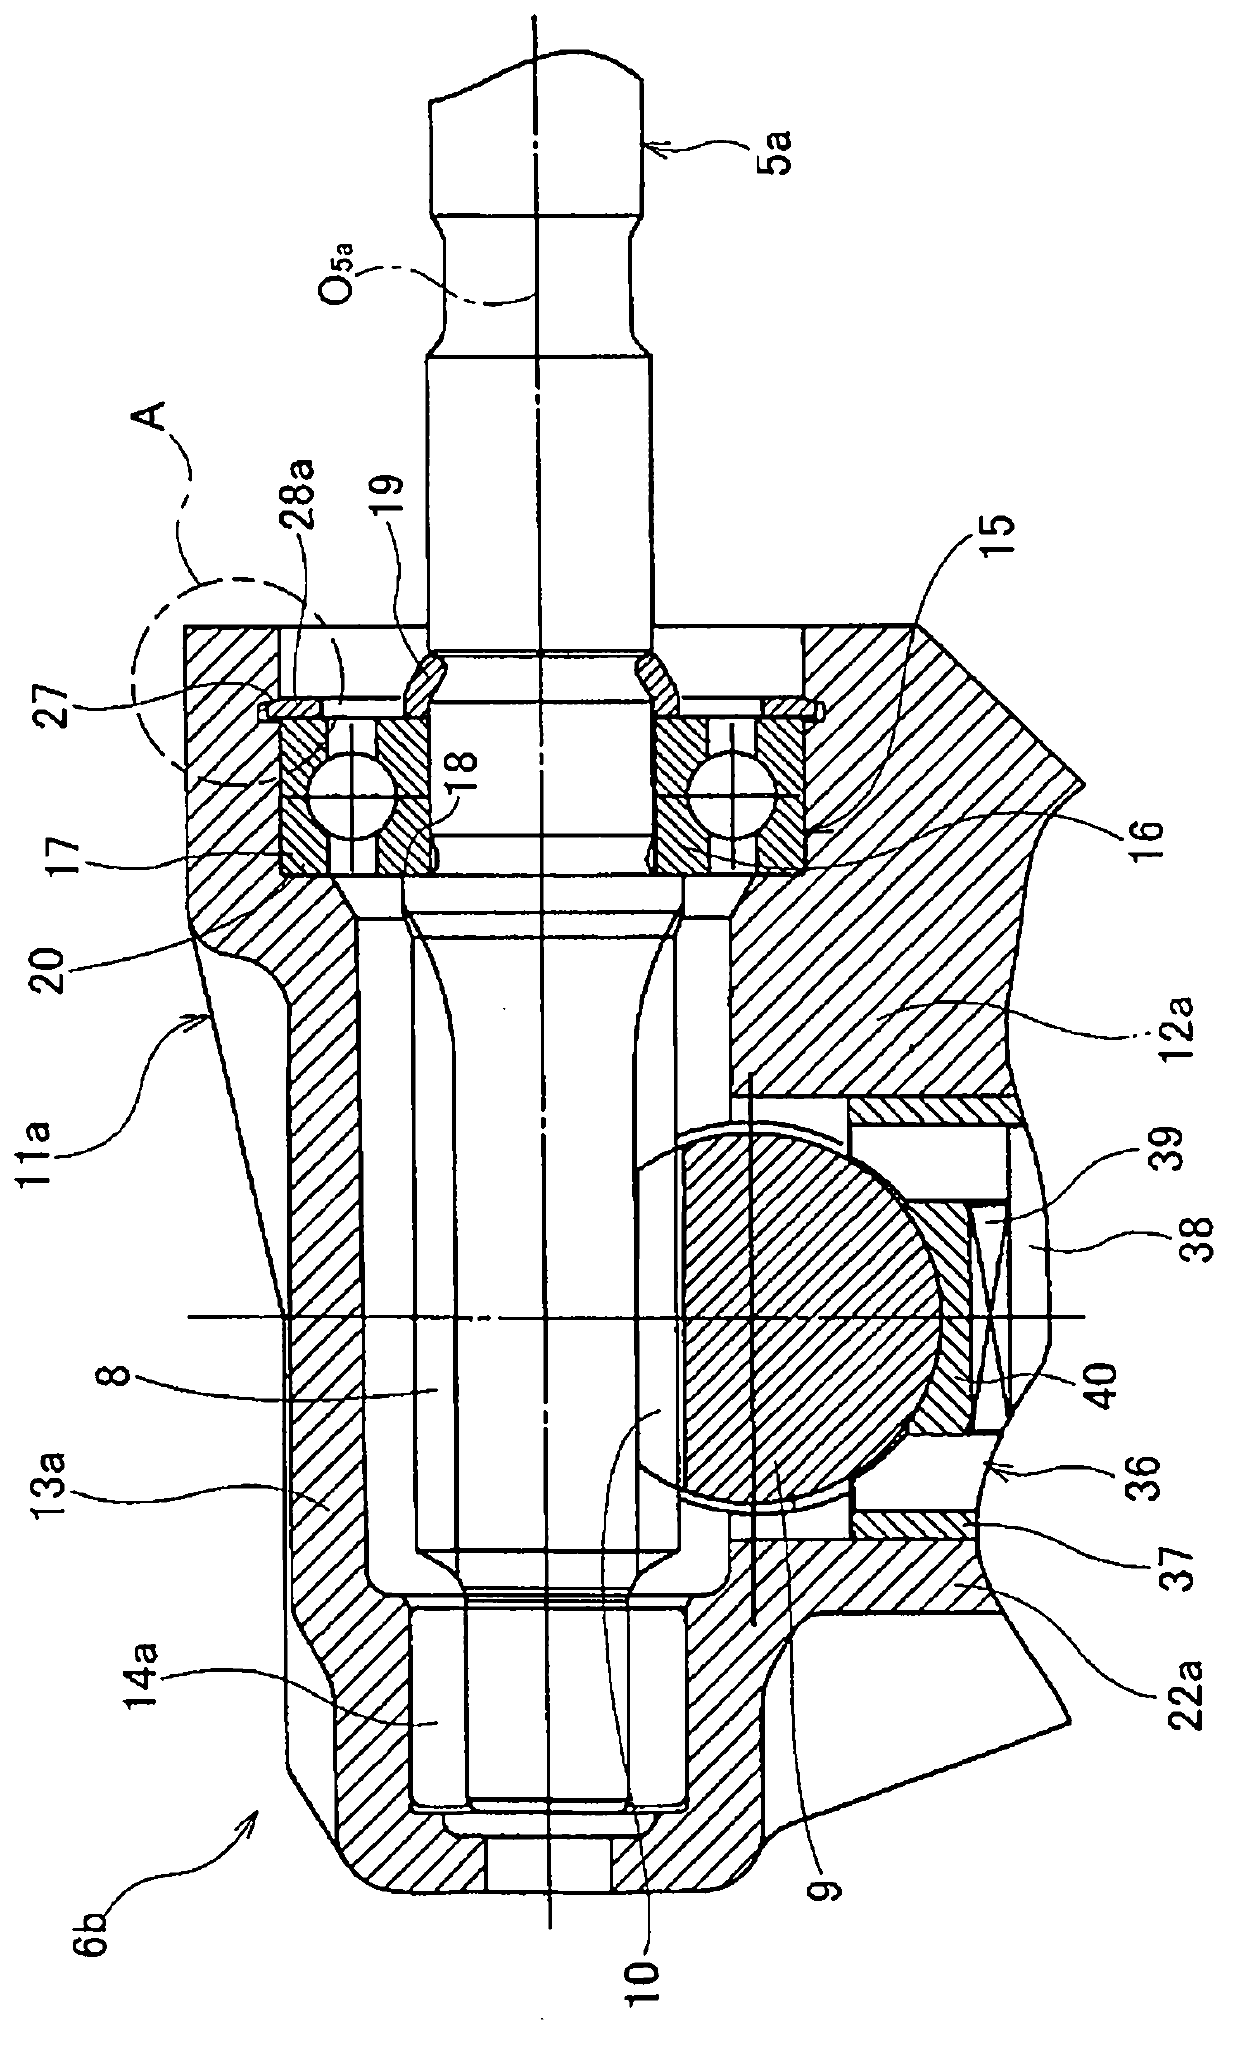 Bearing affixation structure and steering gear unit using bearing affixation structure